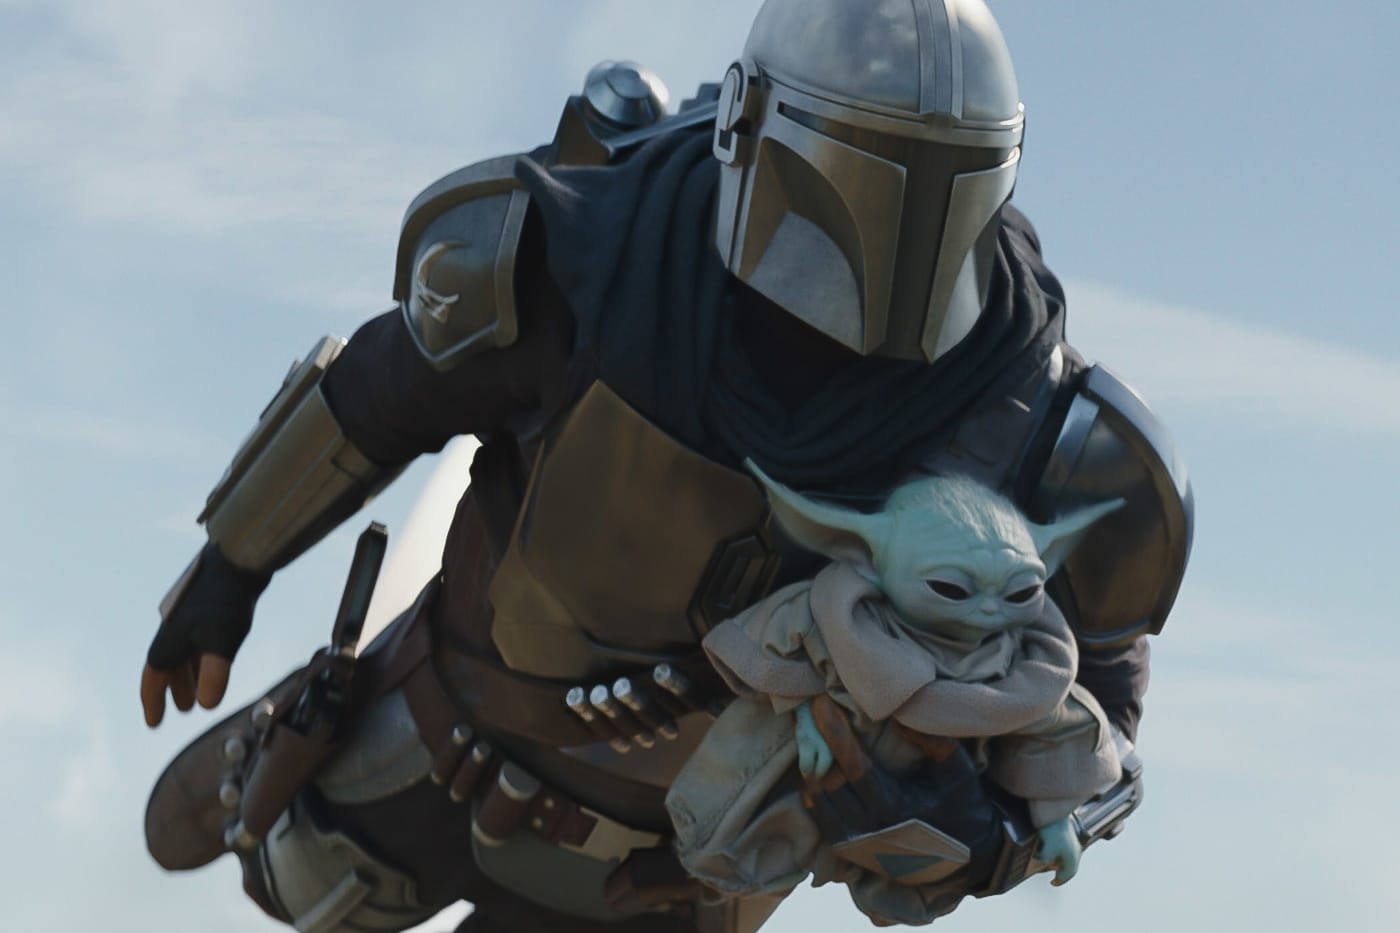 Live Action disney star wars the Mandalorian and grogu Film 2026 release